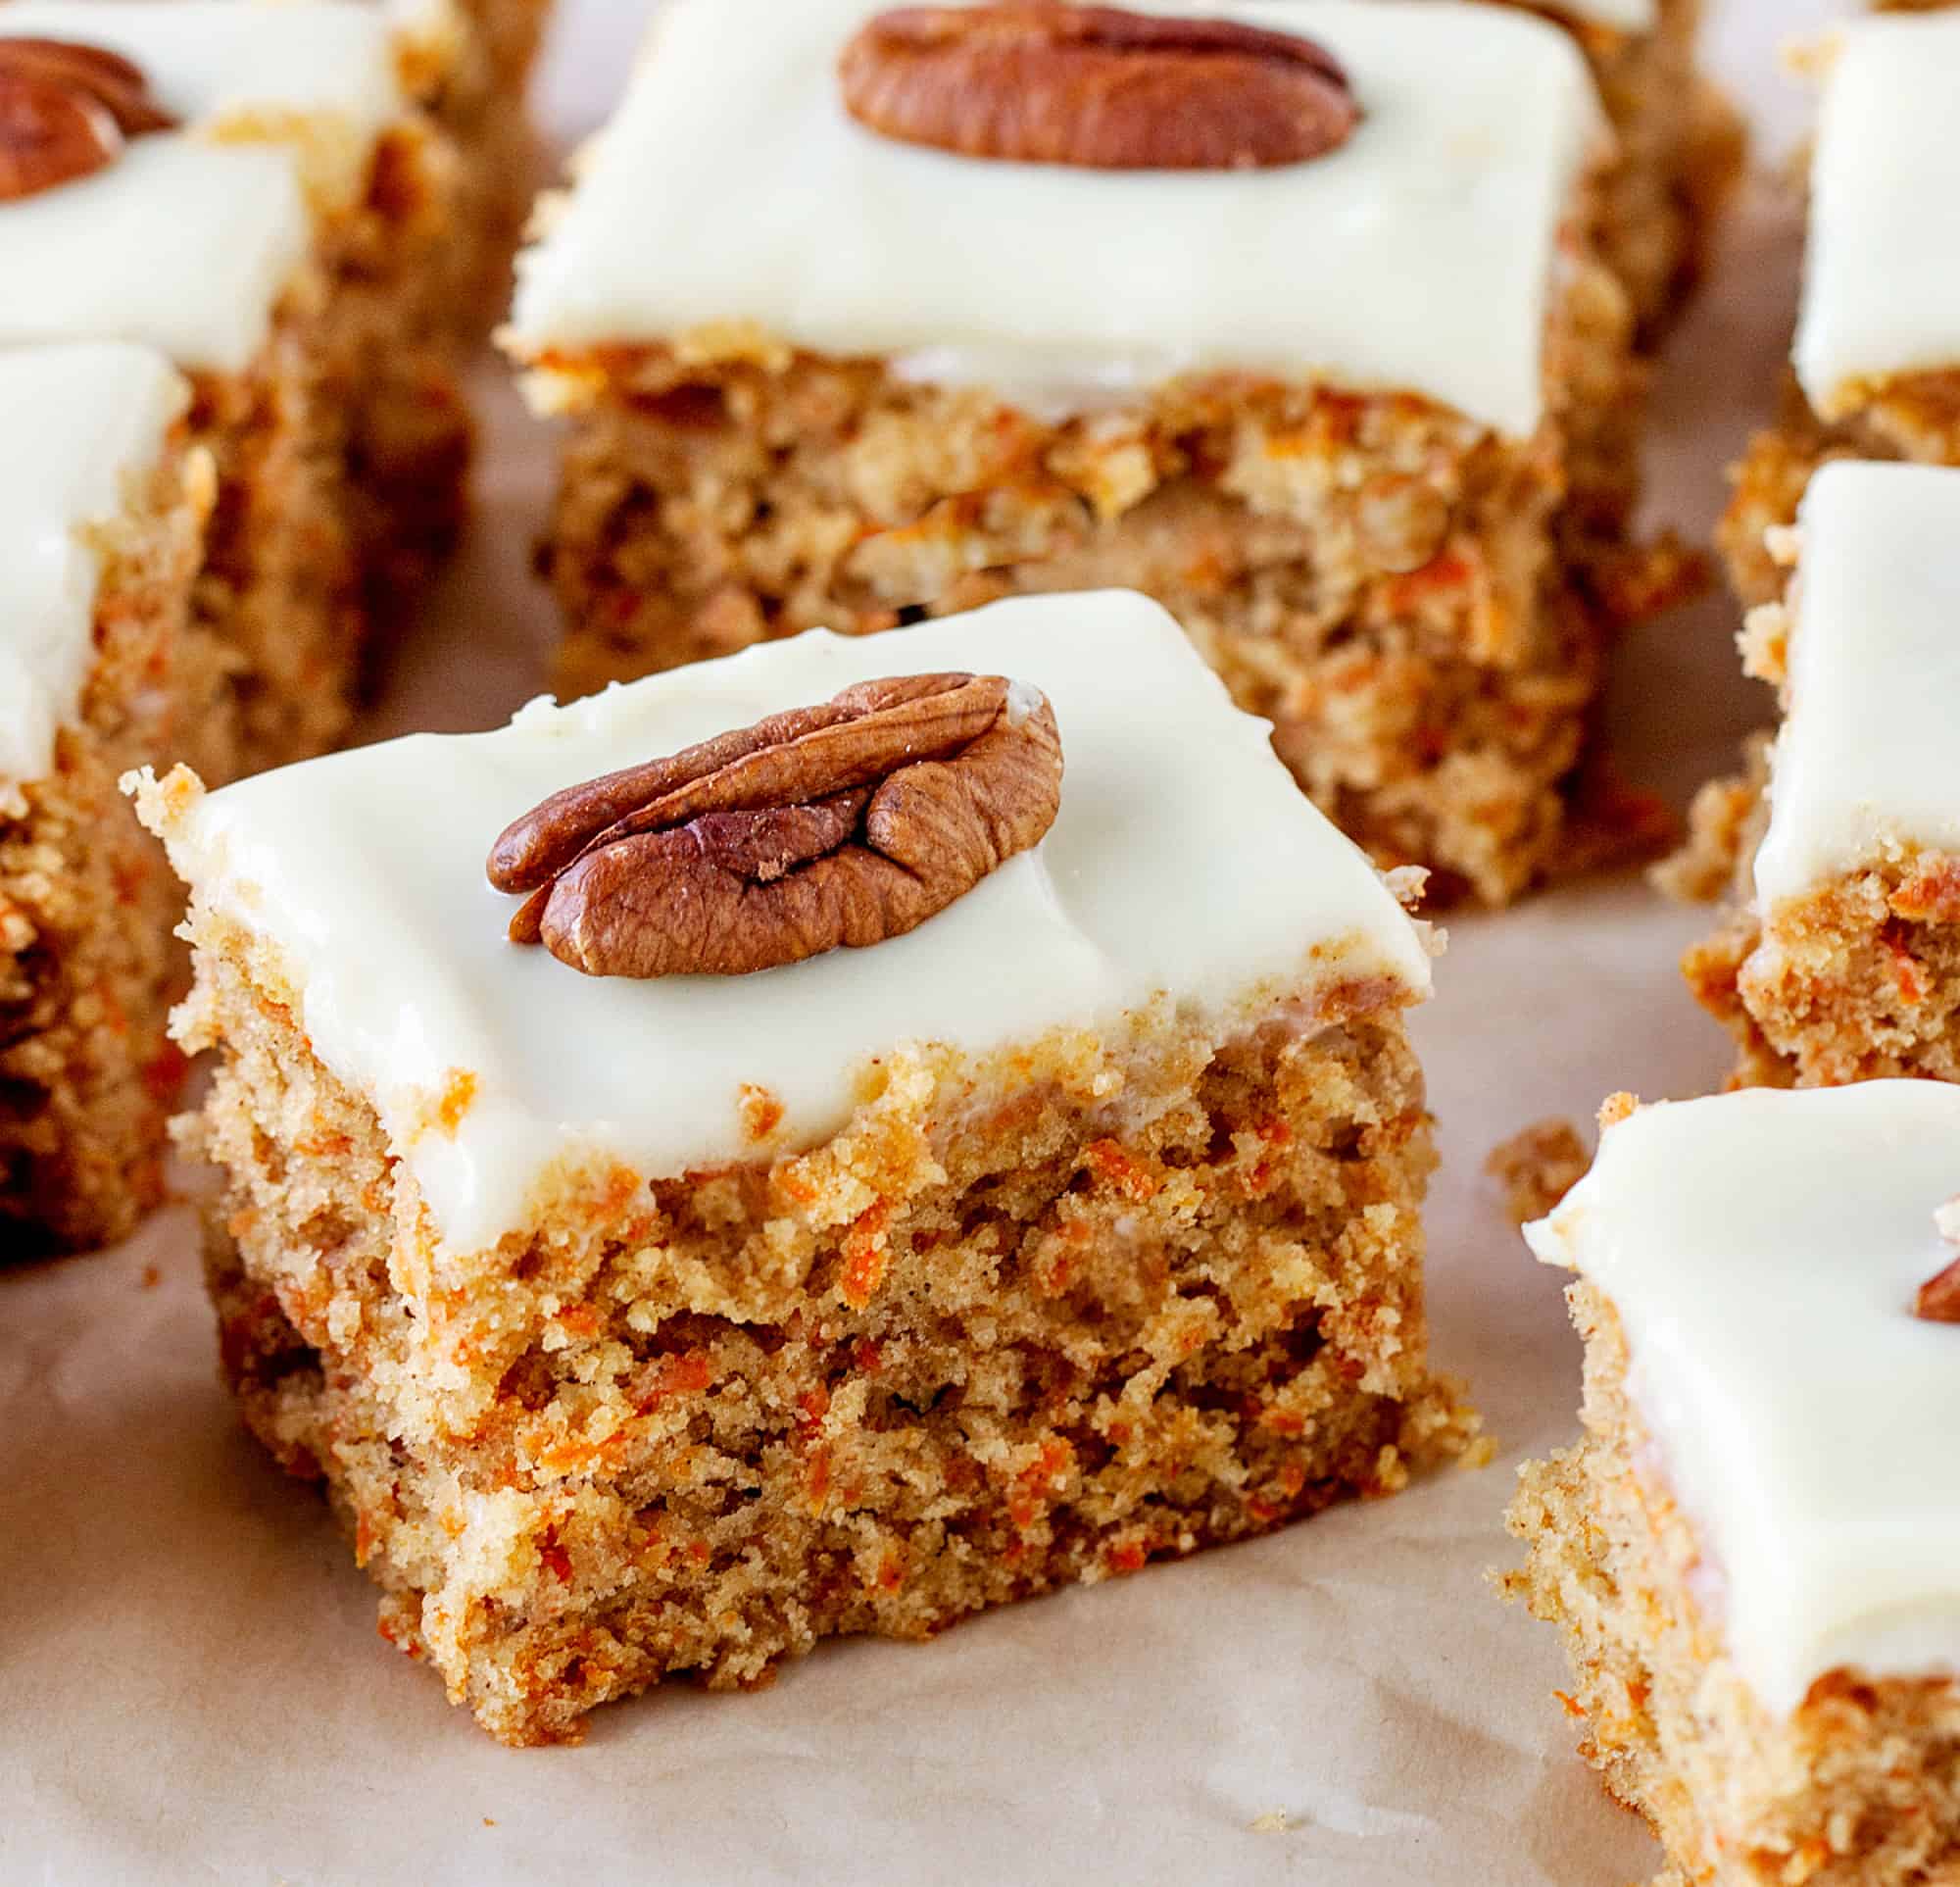 Simple Carrot Cake Recipe - with ingredient substitutions! | Vintage